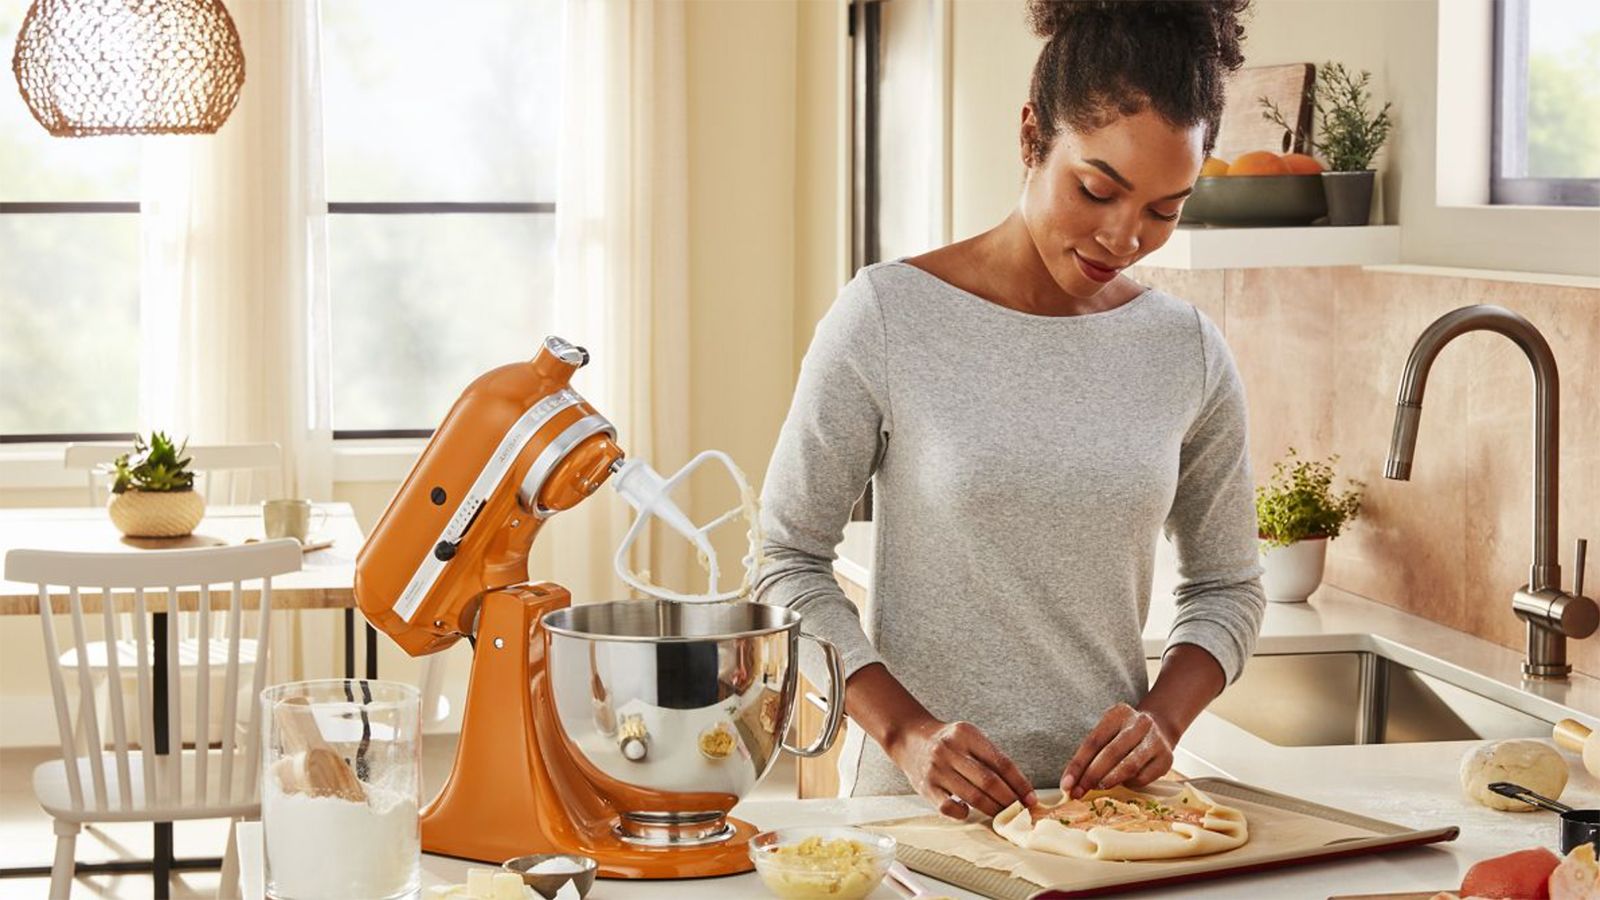 The best deals on KitchenAid mixers this Cyber Monday 2021